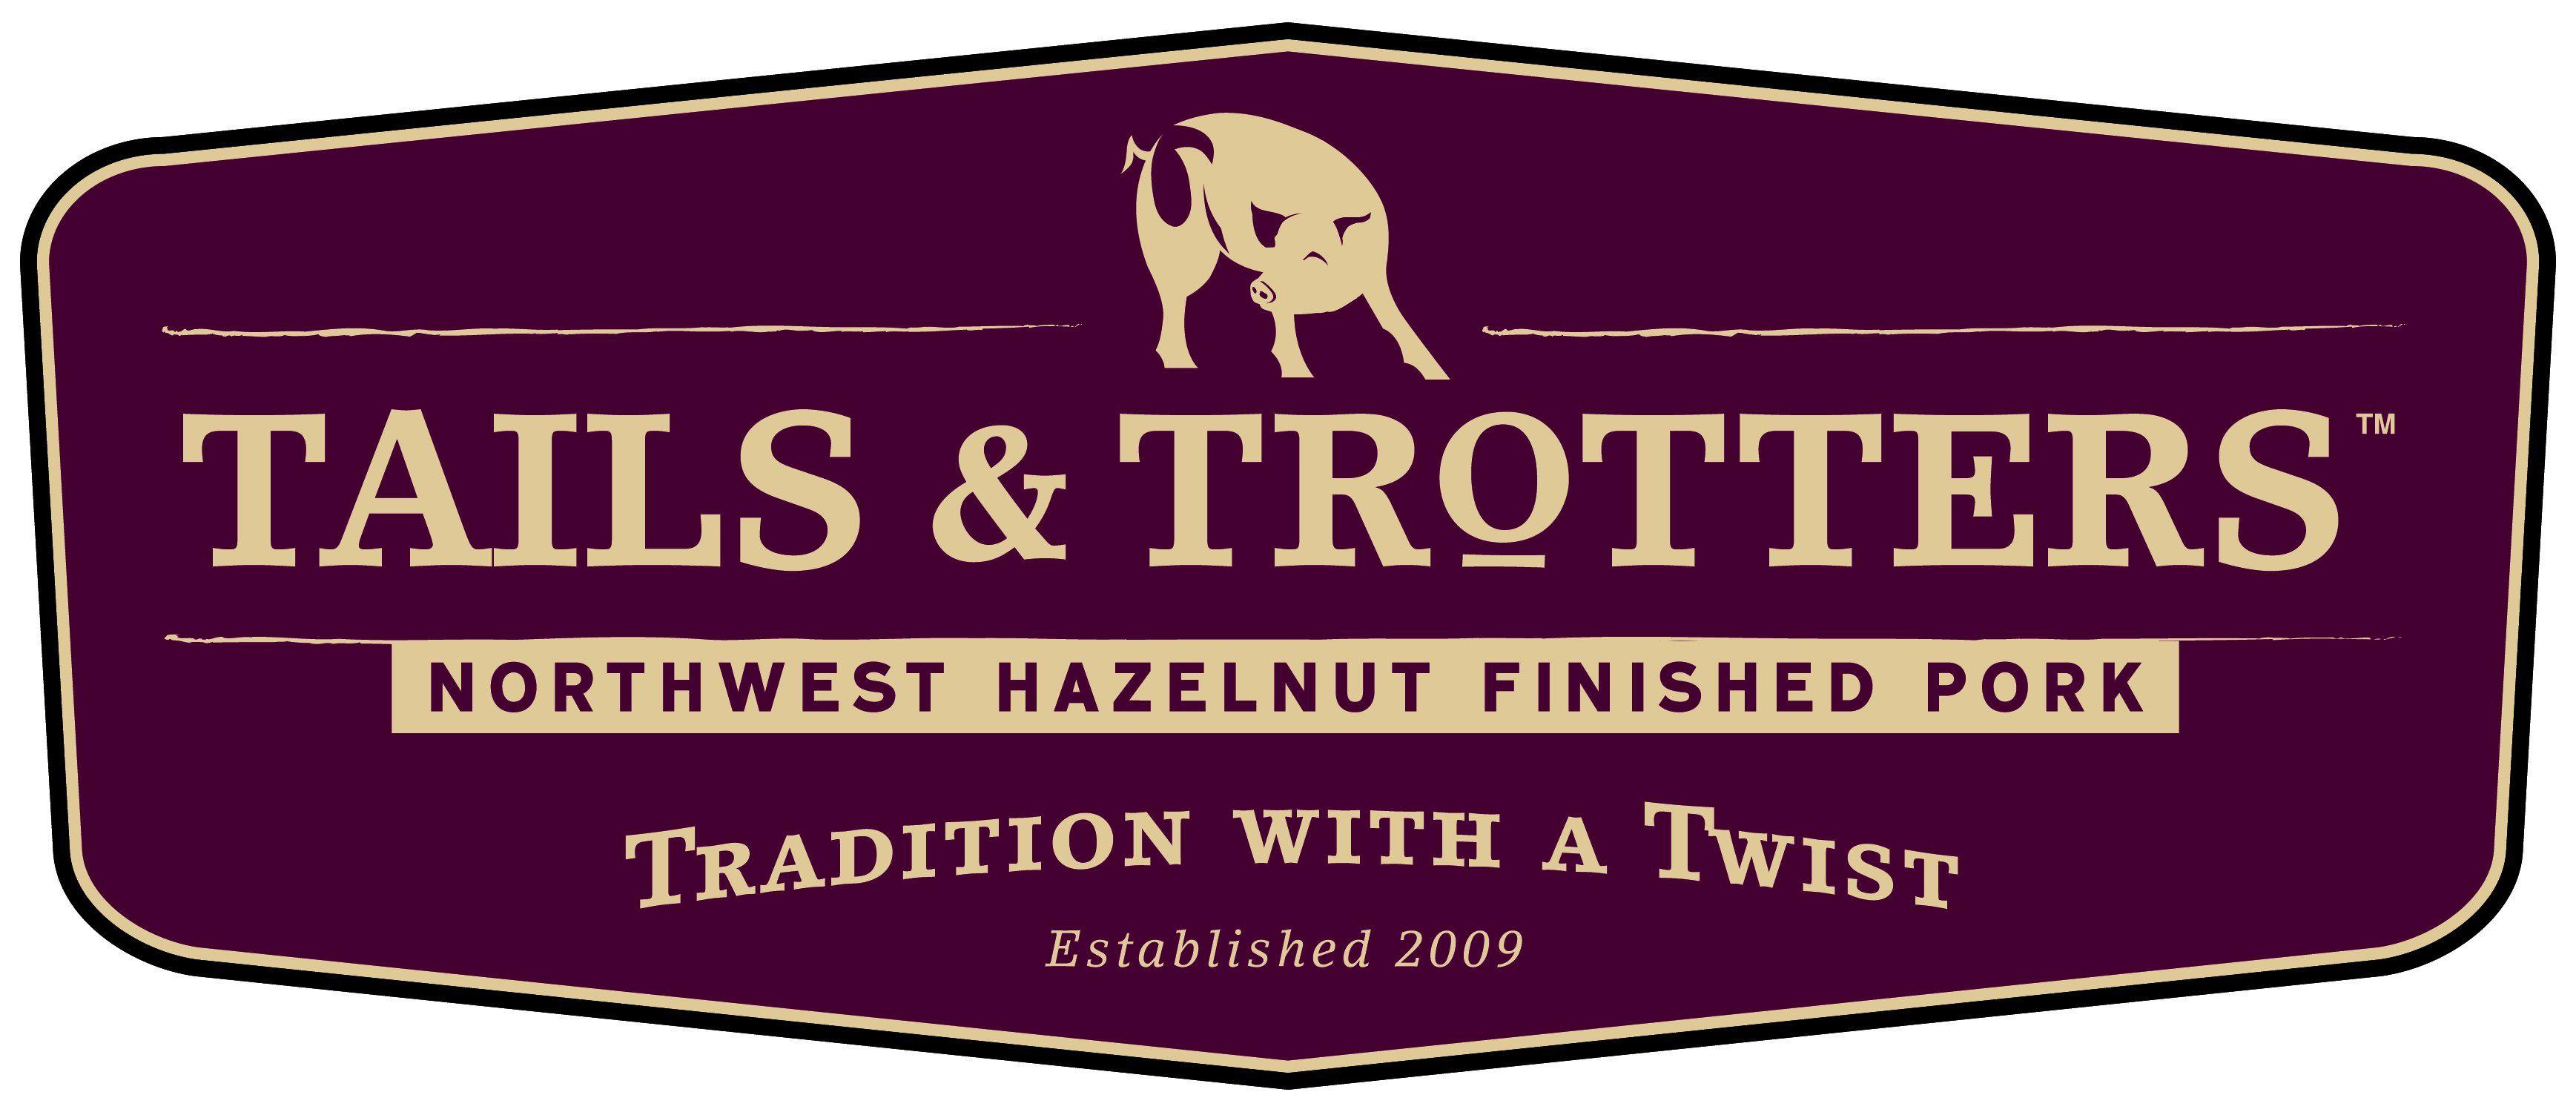 Trotters Logo - Tails & Trotters Online Gift Card